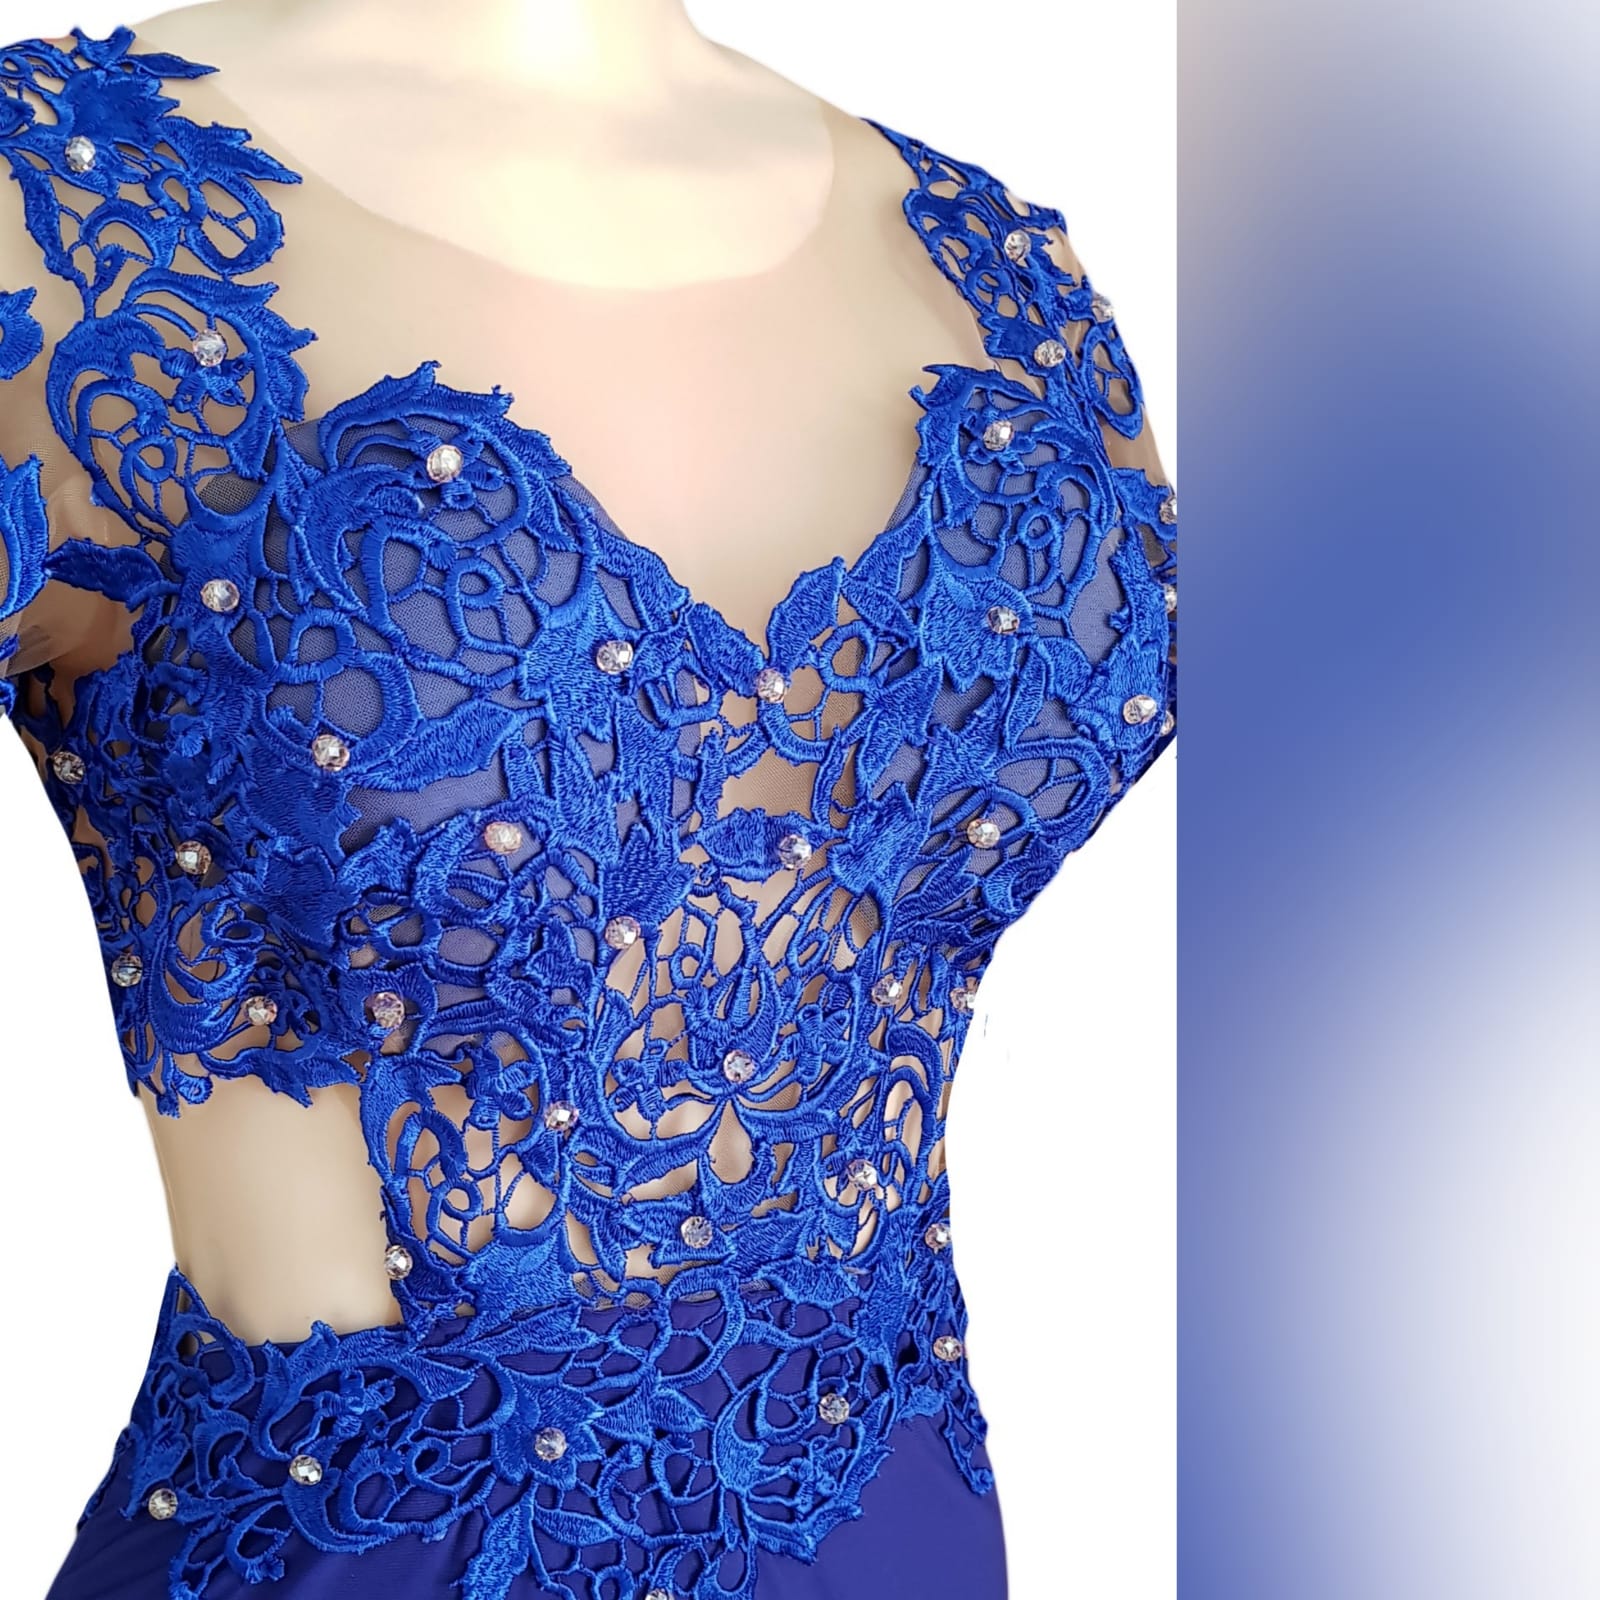 Royal blue shimmer long prom dress 3 royal blue shimmer long prom dress with a lace illusion bodice, side tummy & back opening with a sweetheart neckline. Slit and a train. Lace detailed with gold beads.